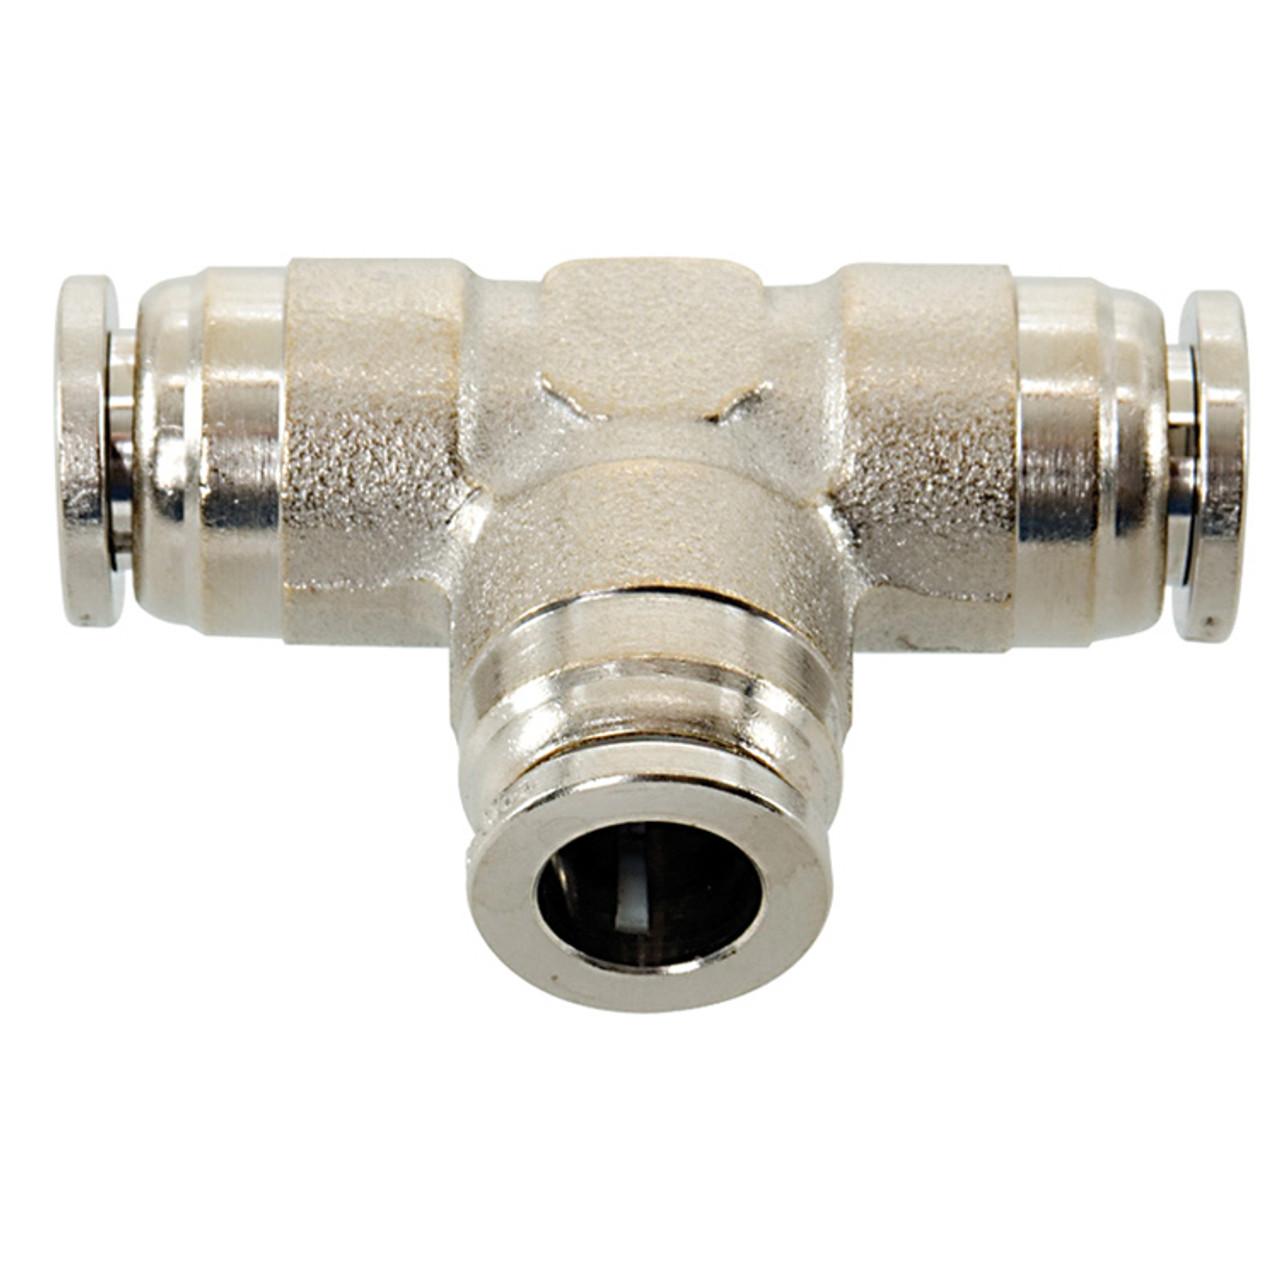 3/16" Nickel Plated Brass Push-To-Connect Tee   G60T00P-03-03